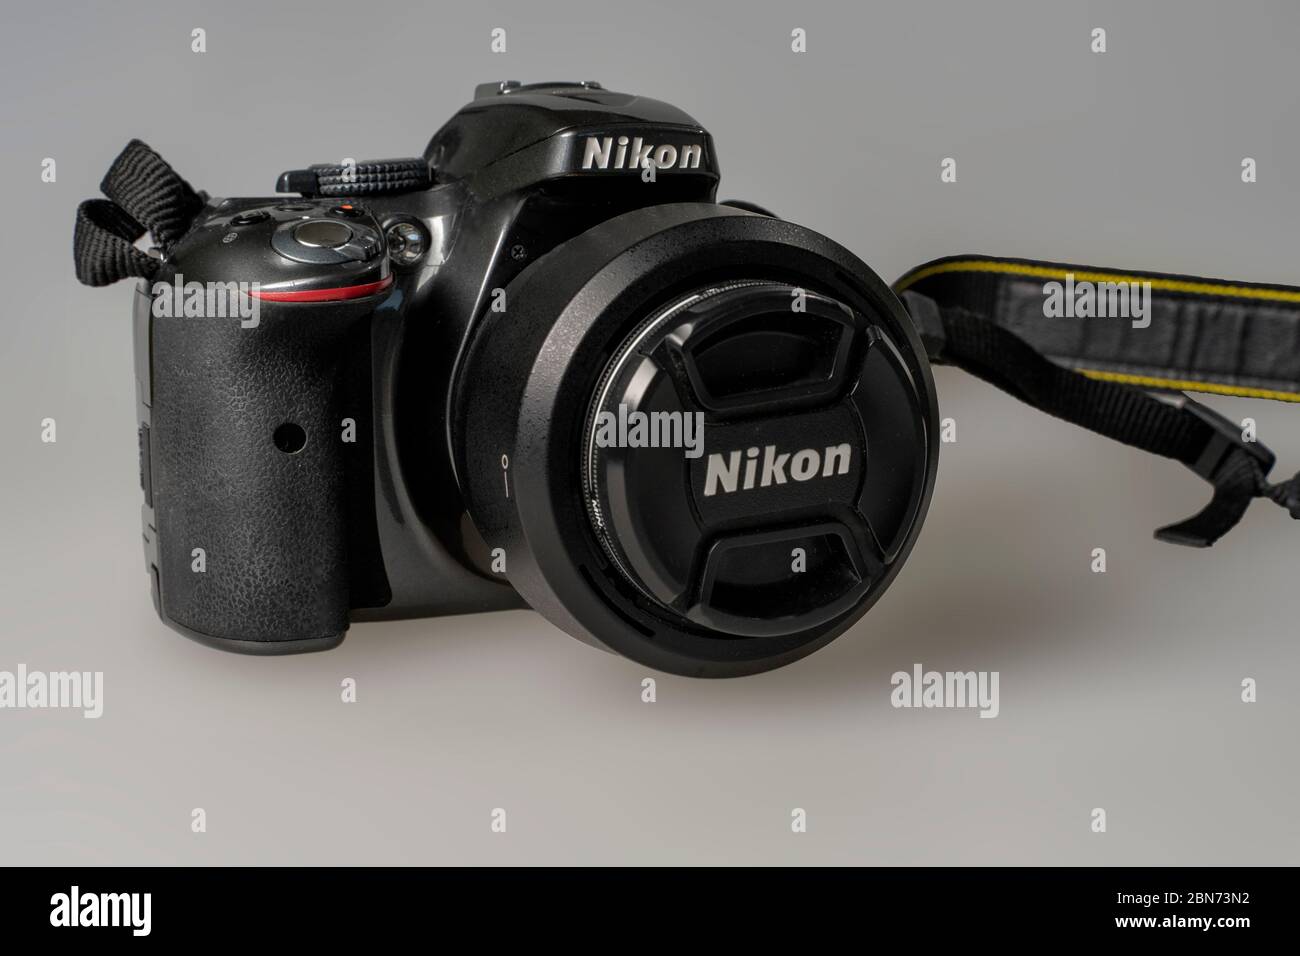 Russia, Moscow, 03 13 2020 Nikon 5600 camera on a gray background Stock Photo